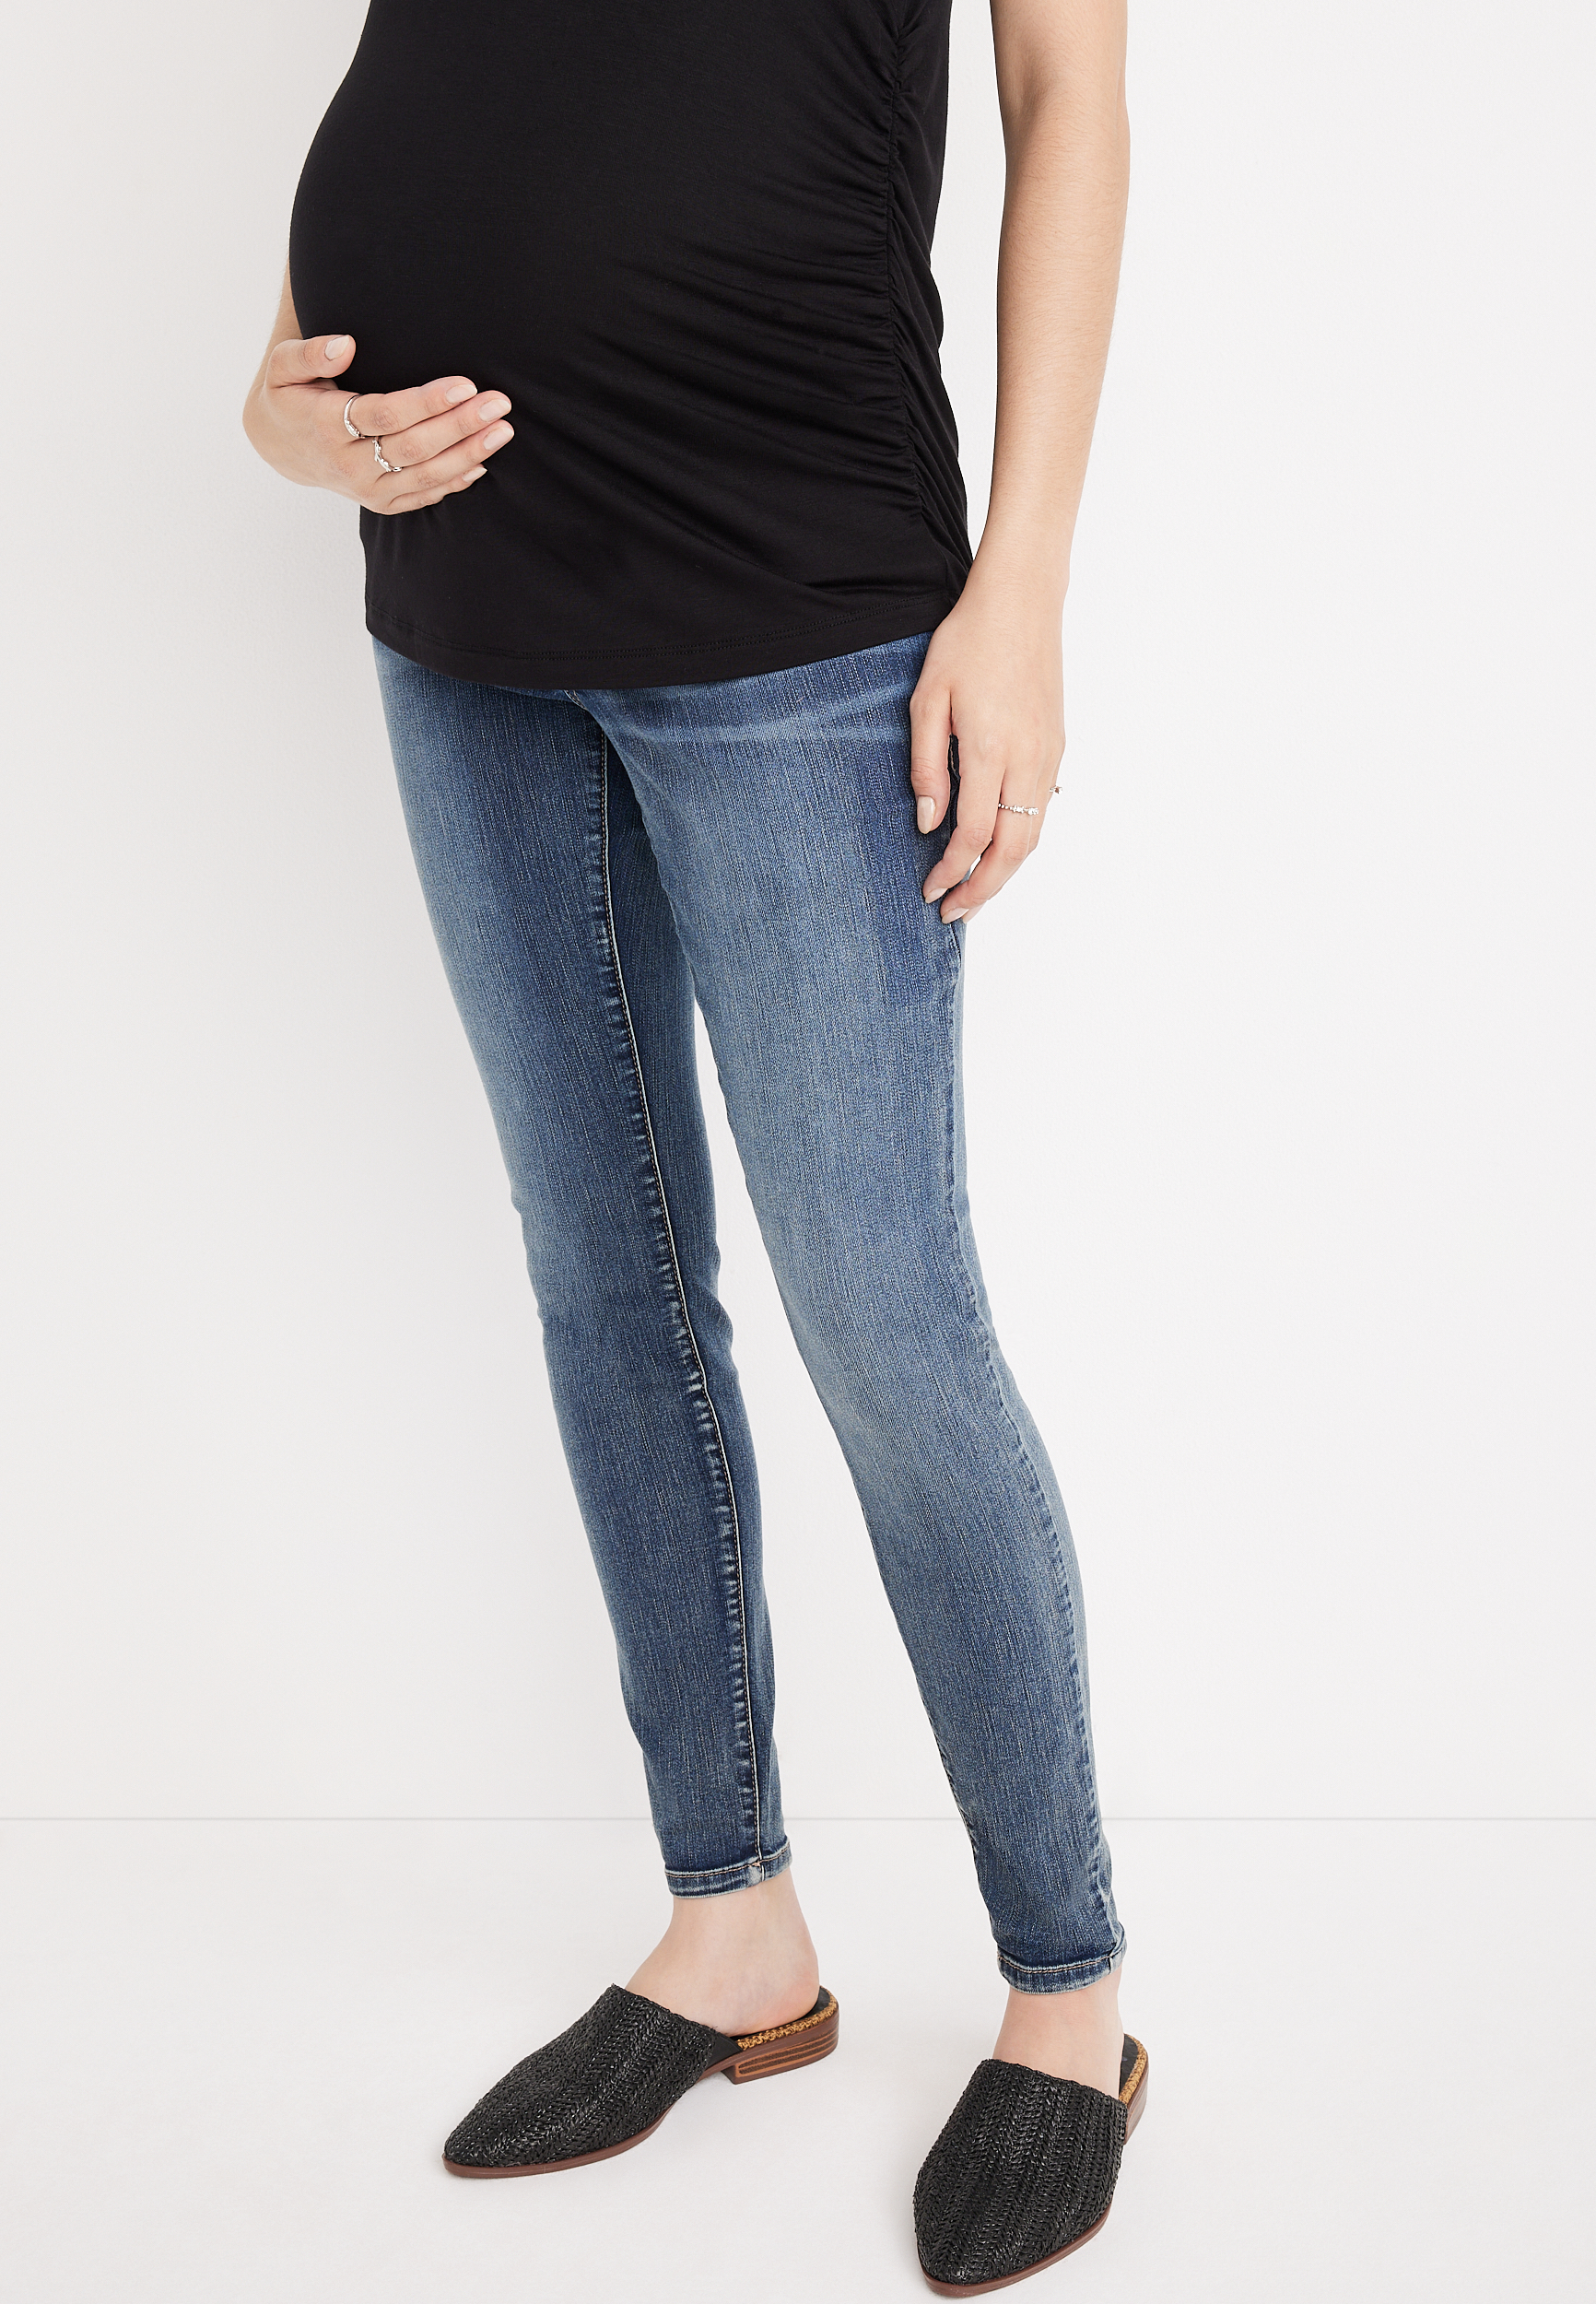 m jeans by maurices™ Everflex™ Skinny Side Panel Maternity Jean | maurices